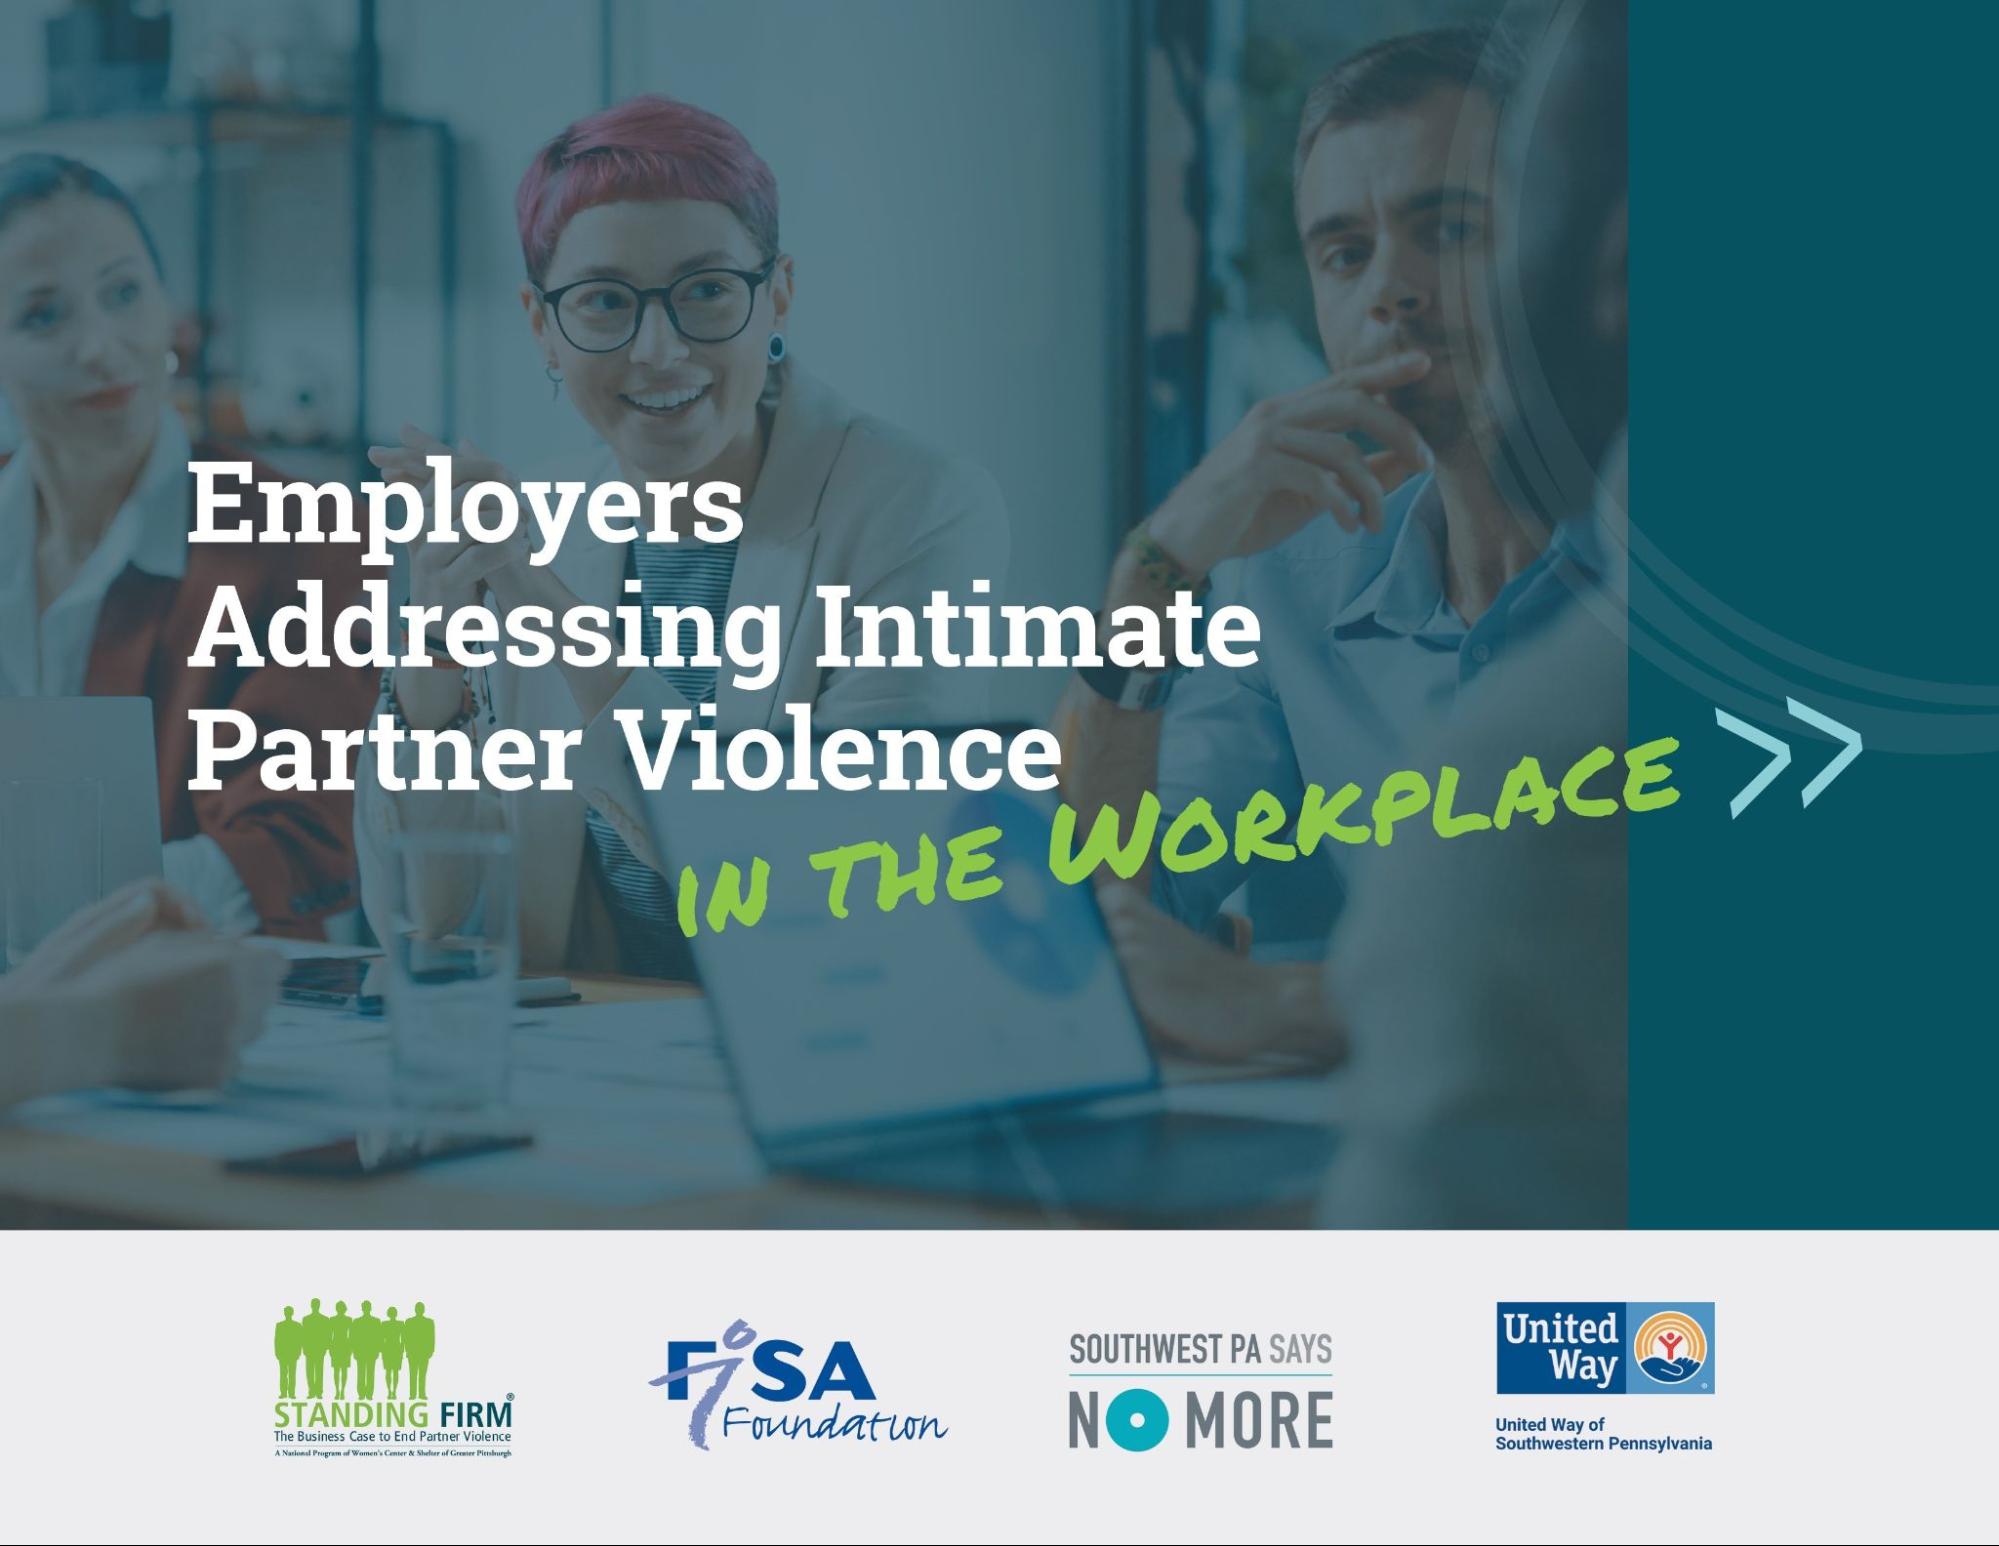 NEW REPORT: Employers Address Partner Violence In the Workplace